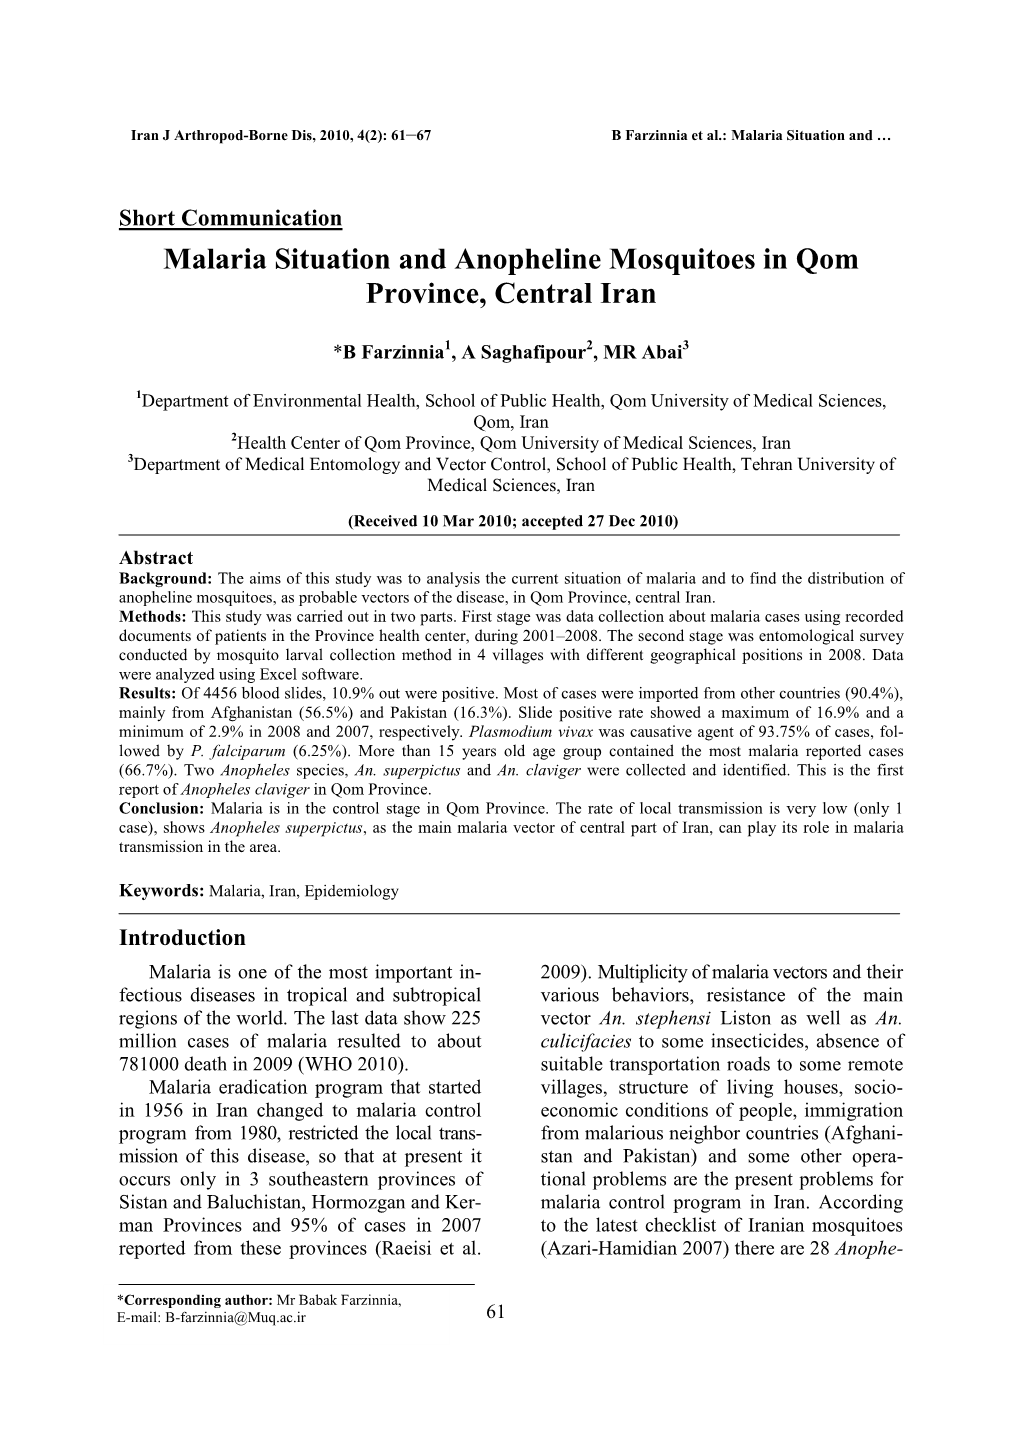 Malaria Situation and Anopheline Mosquitoes in Qom Province, Central Iran